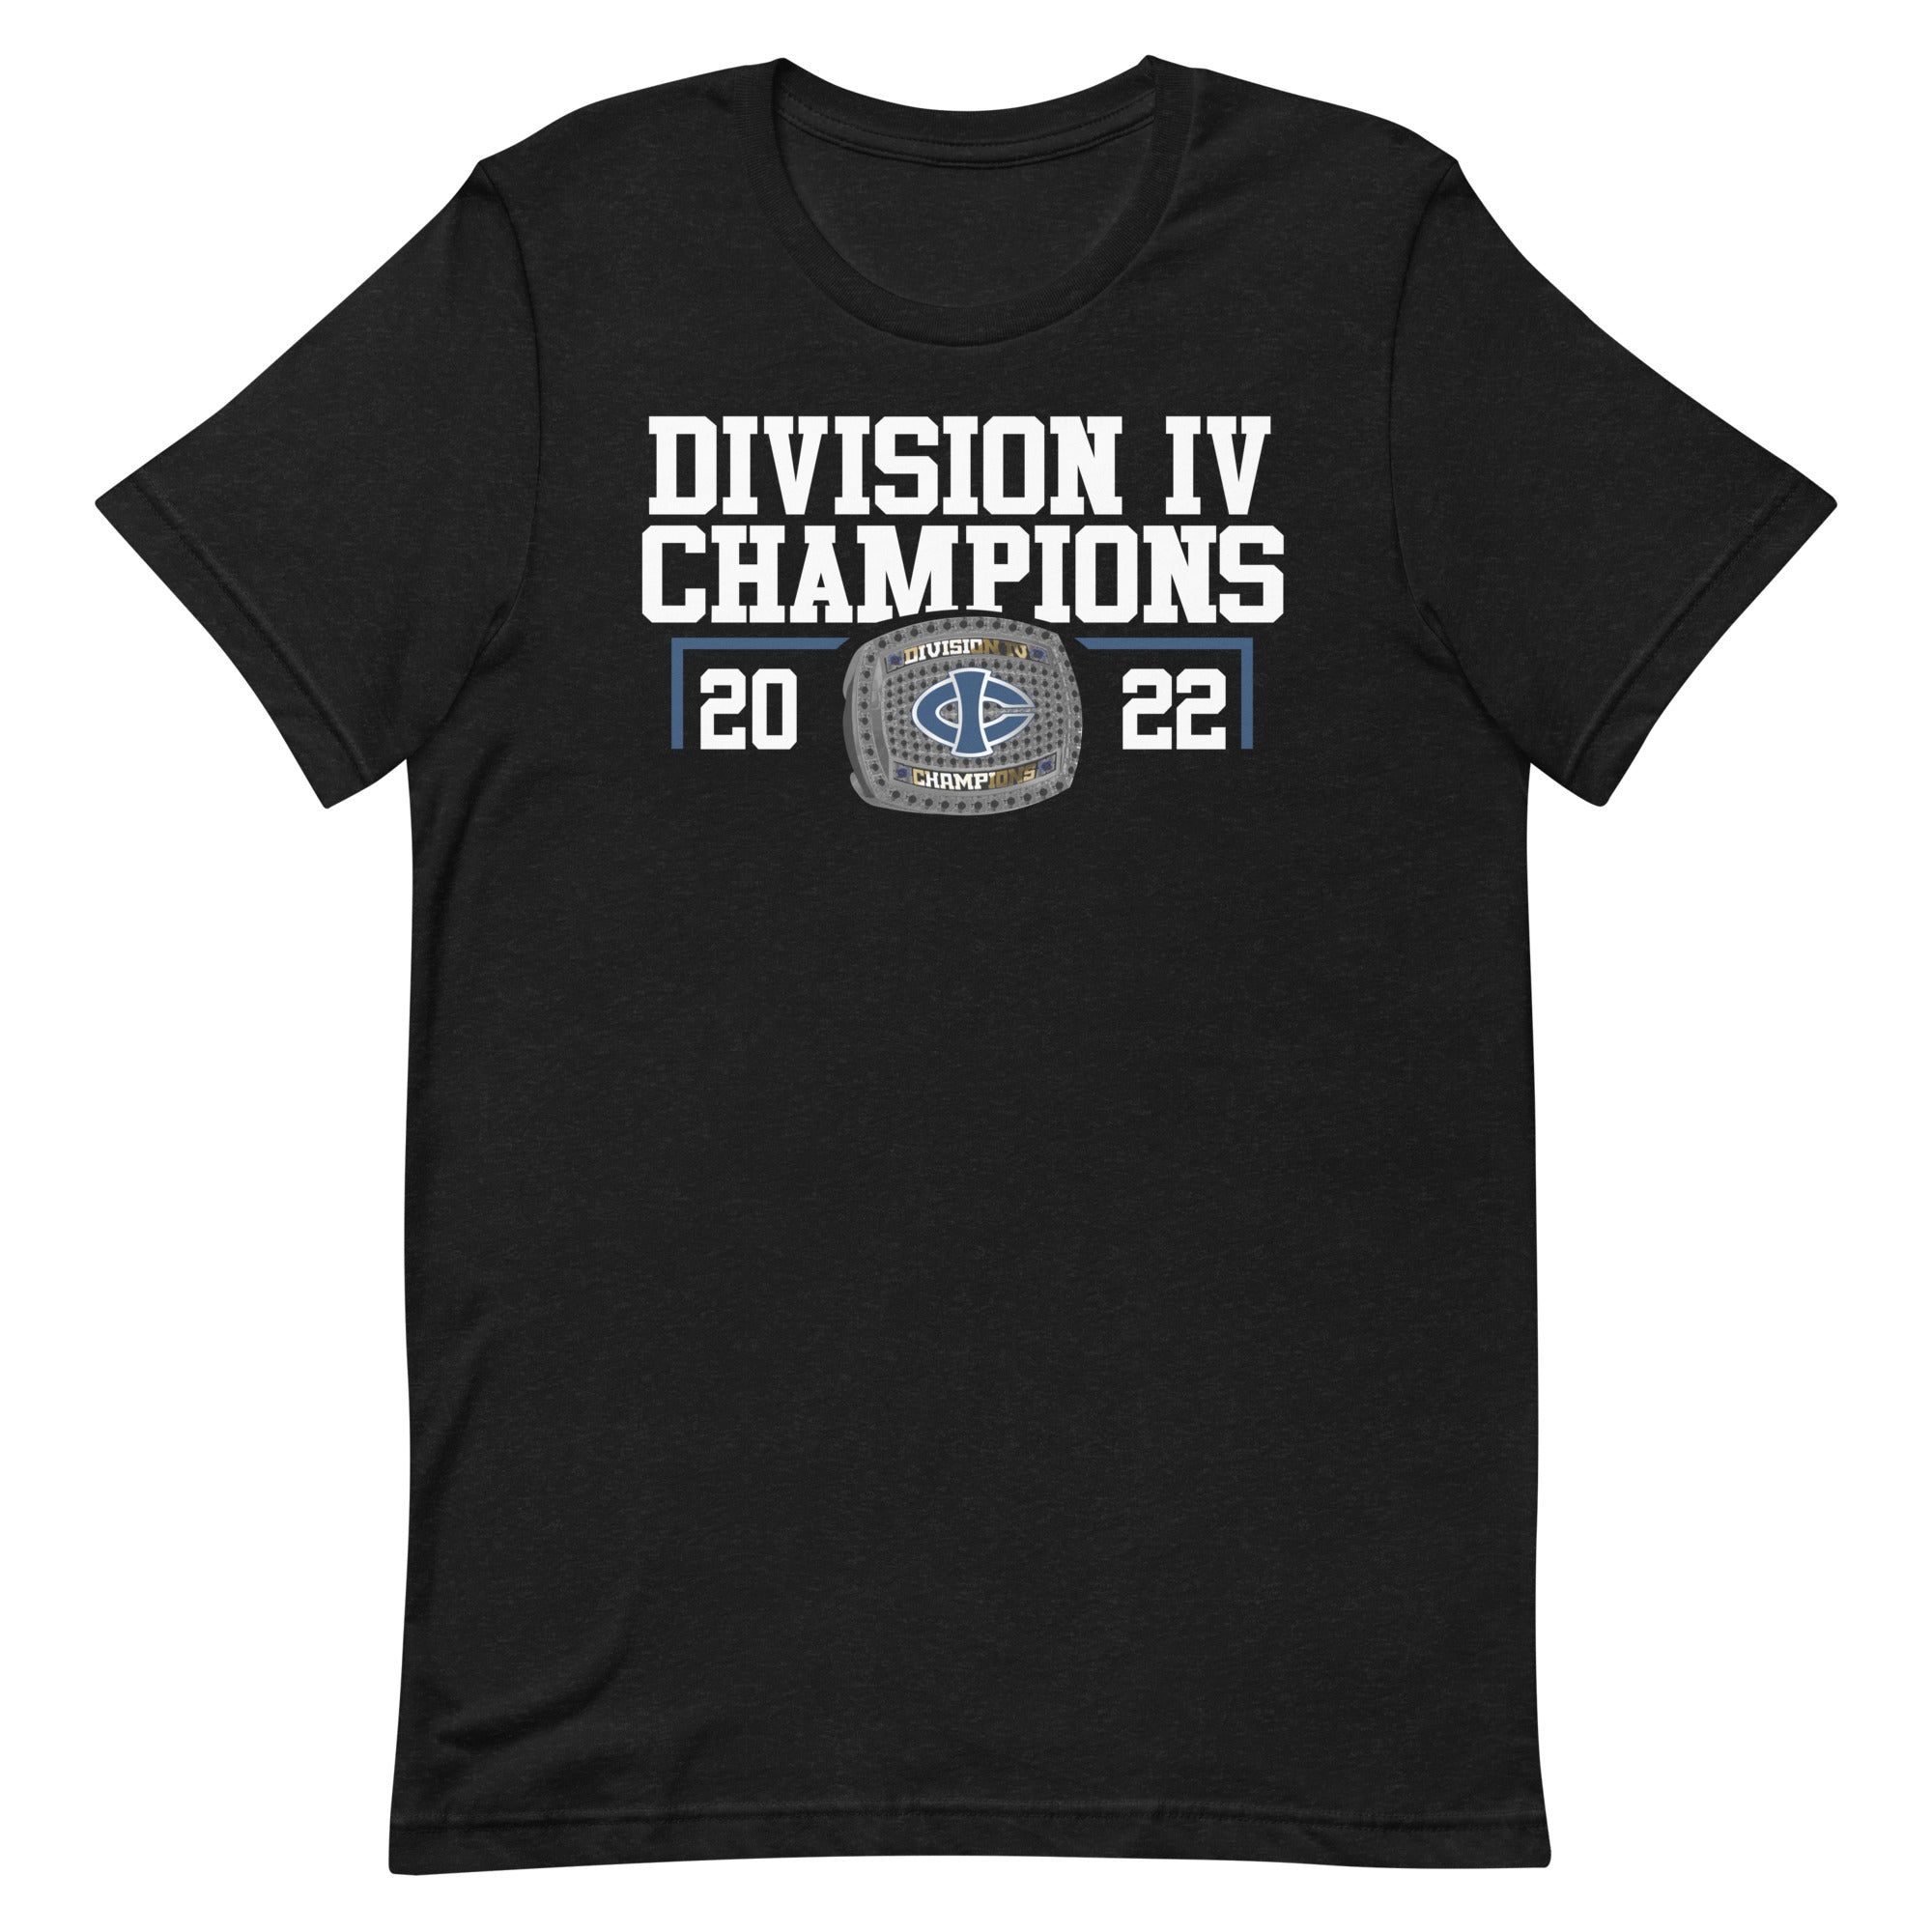 Iowa central Community College 2022 Division IV Championship Ring Unisex t-shirt